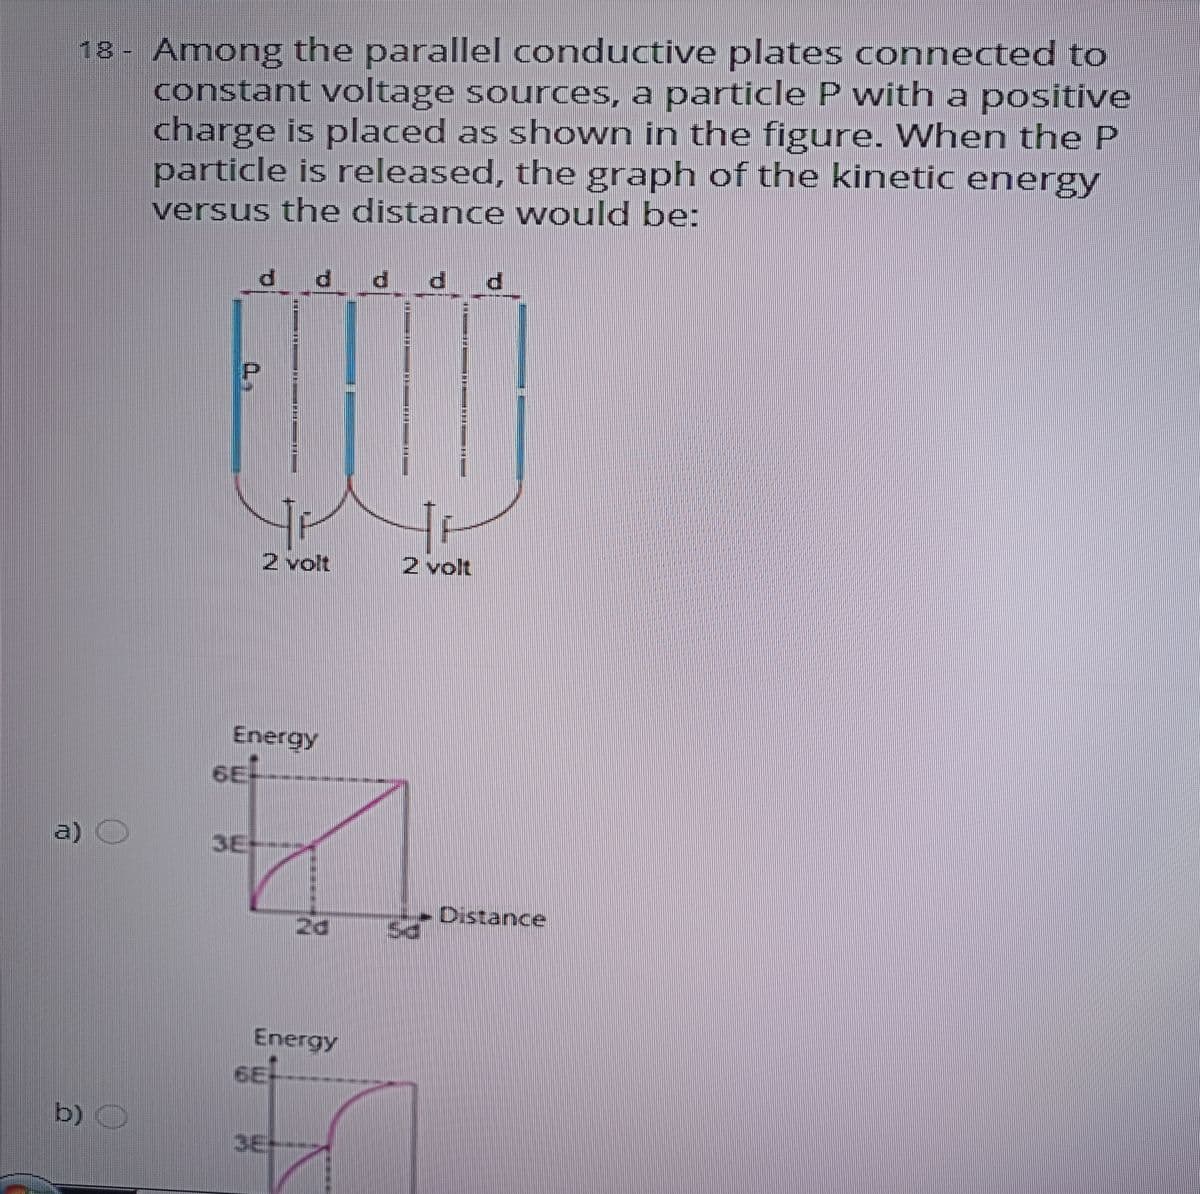 18- Among the parallel conductive plates connected to
constant voltage sources, a particle P with a positive
charge is placed as shown in the figure. When the P
particle is released, the graph of the kinetic energy
versus the distance would be:
P p p
2 volt
2 volt
Energy
a)
3E
Distance
Energy
b) O
